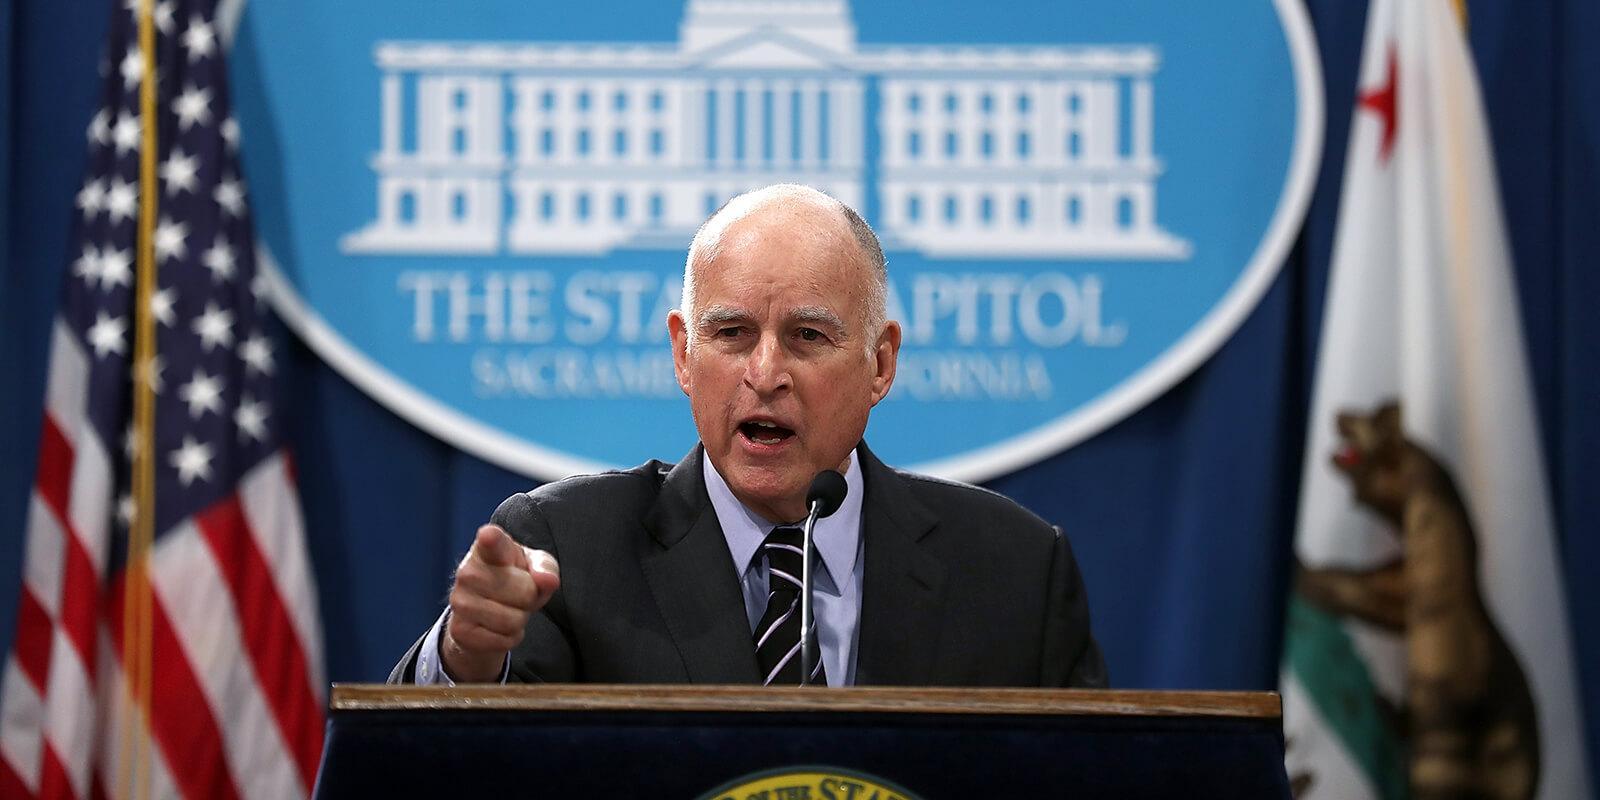 California Gov. Jerry Brown. Photo by Justin Sullivan/Getty Images